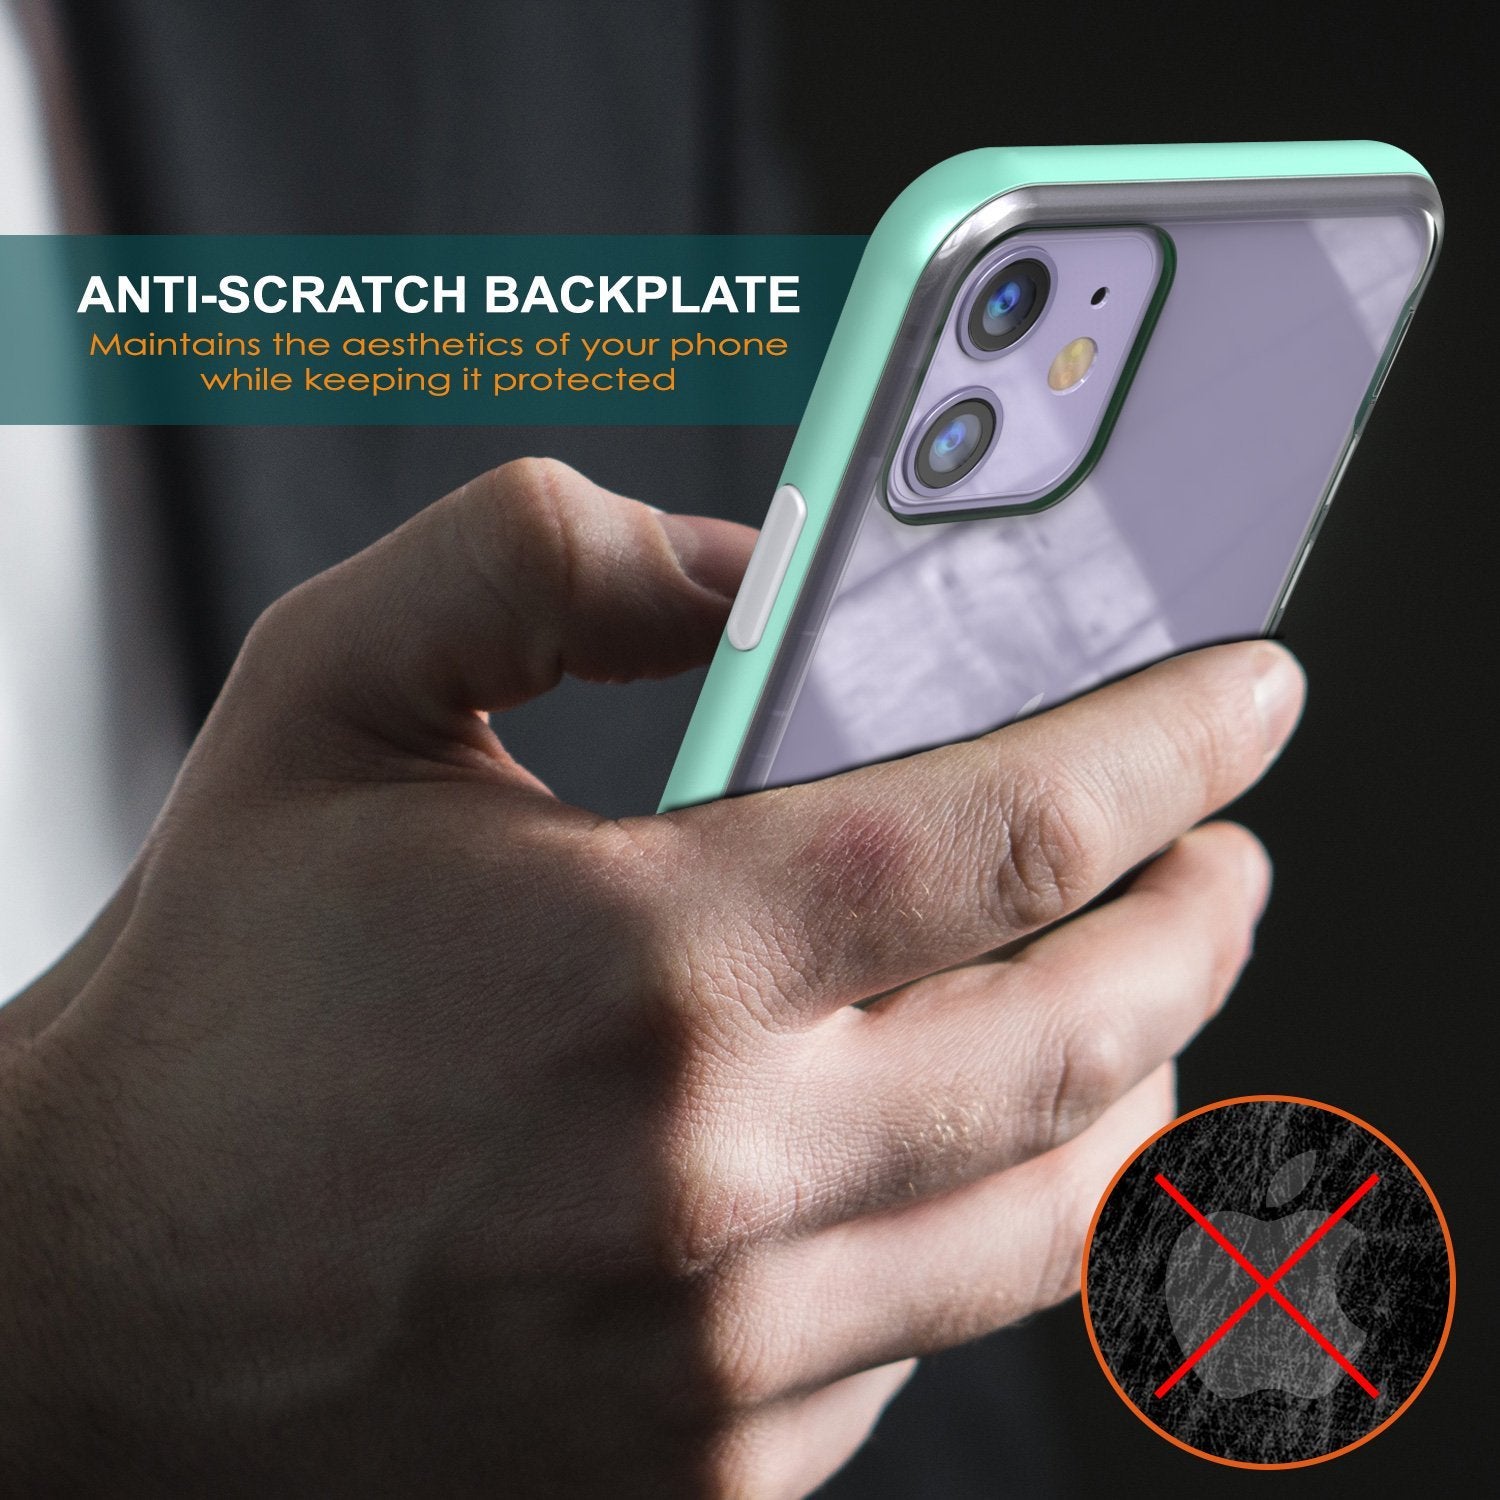 iPhone 12 Case, PUNKcase [LUCID 3.0 Series] [Slim Fit] Protective Cover w/ Integrated Screen Protector [Teal]